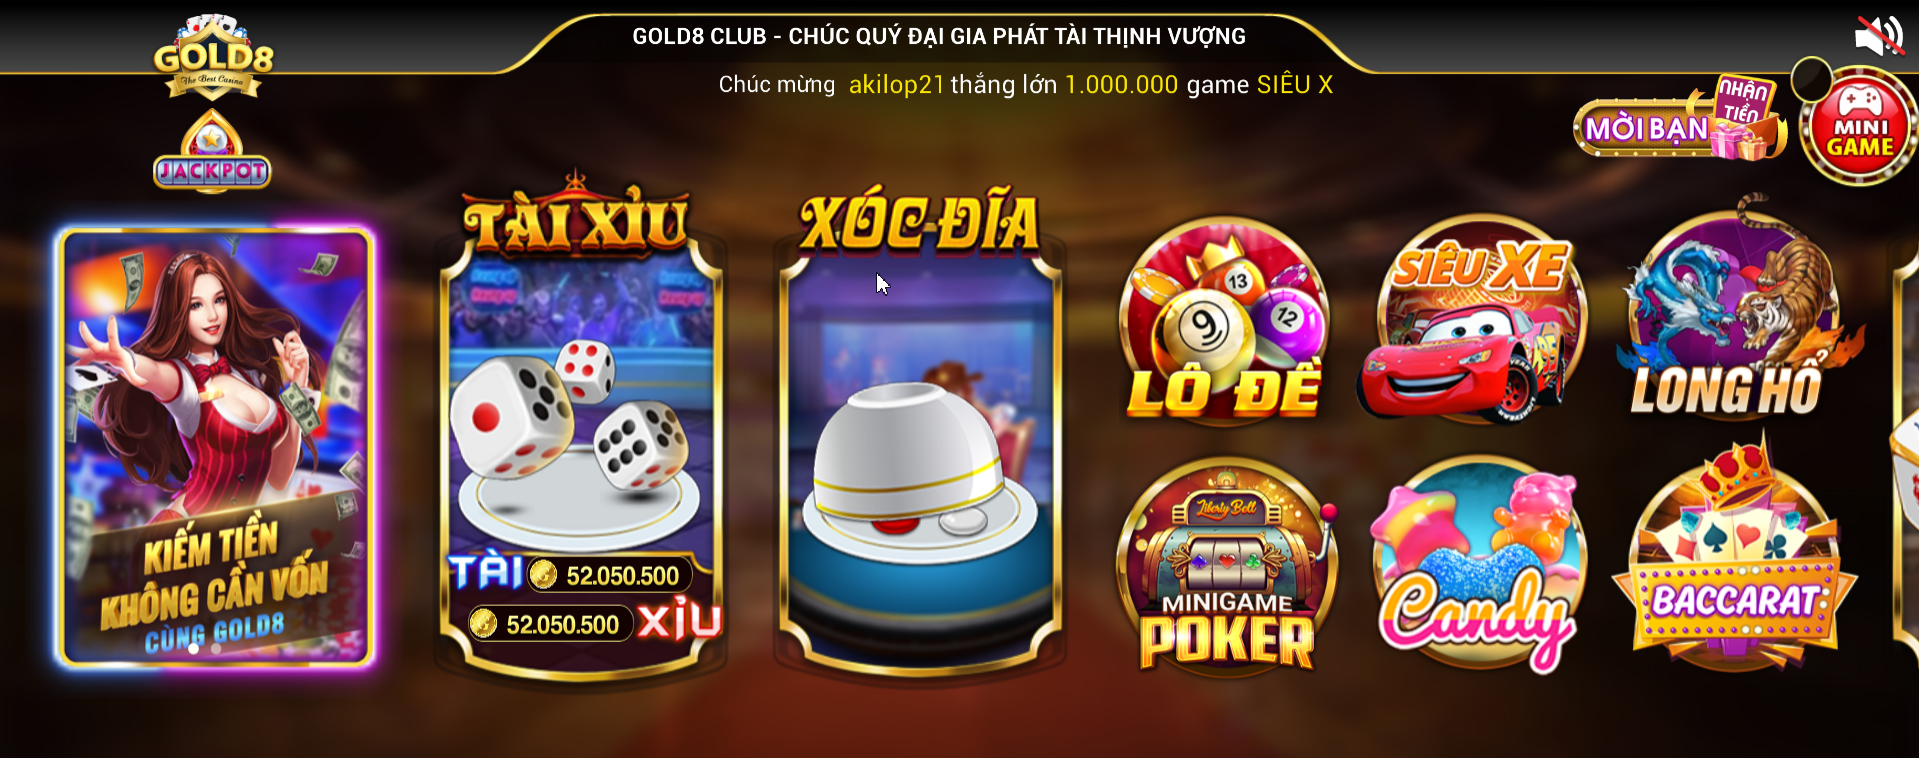 game gold8 club